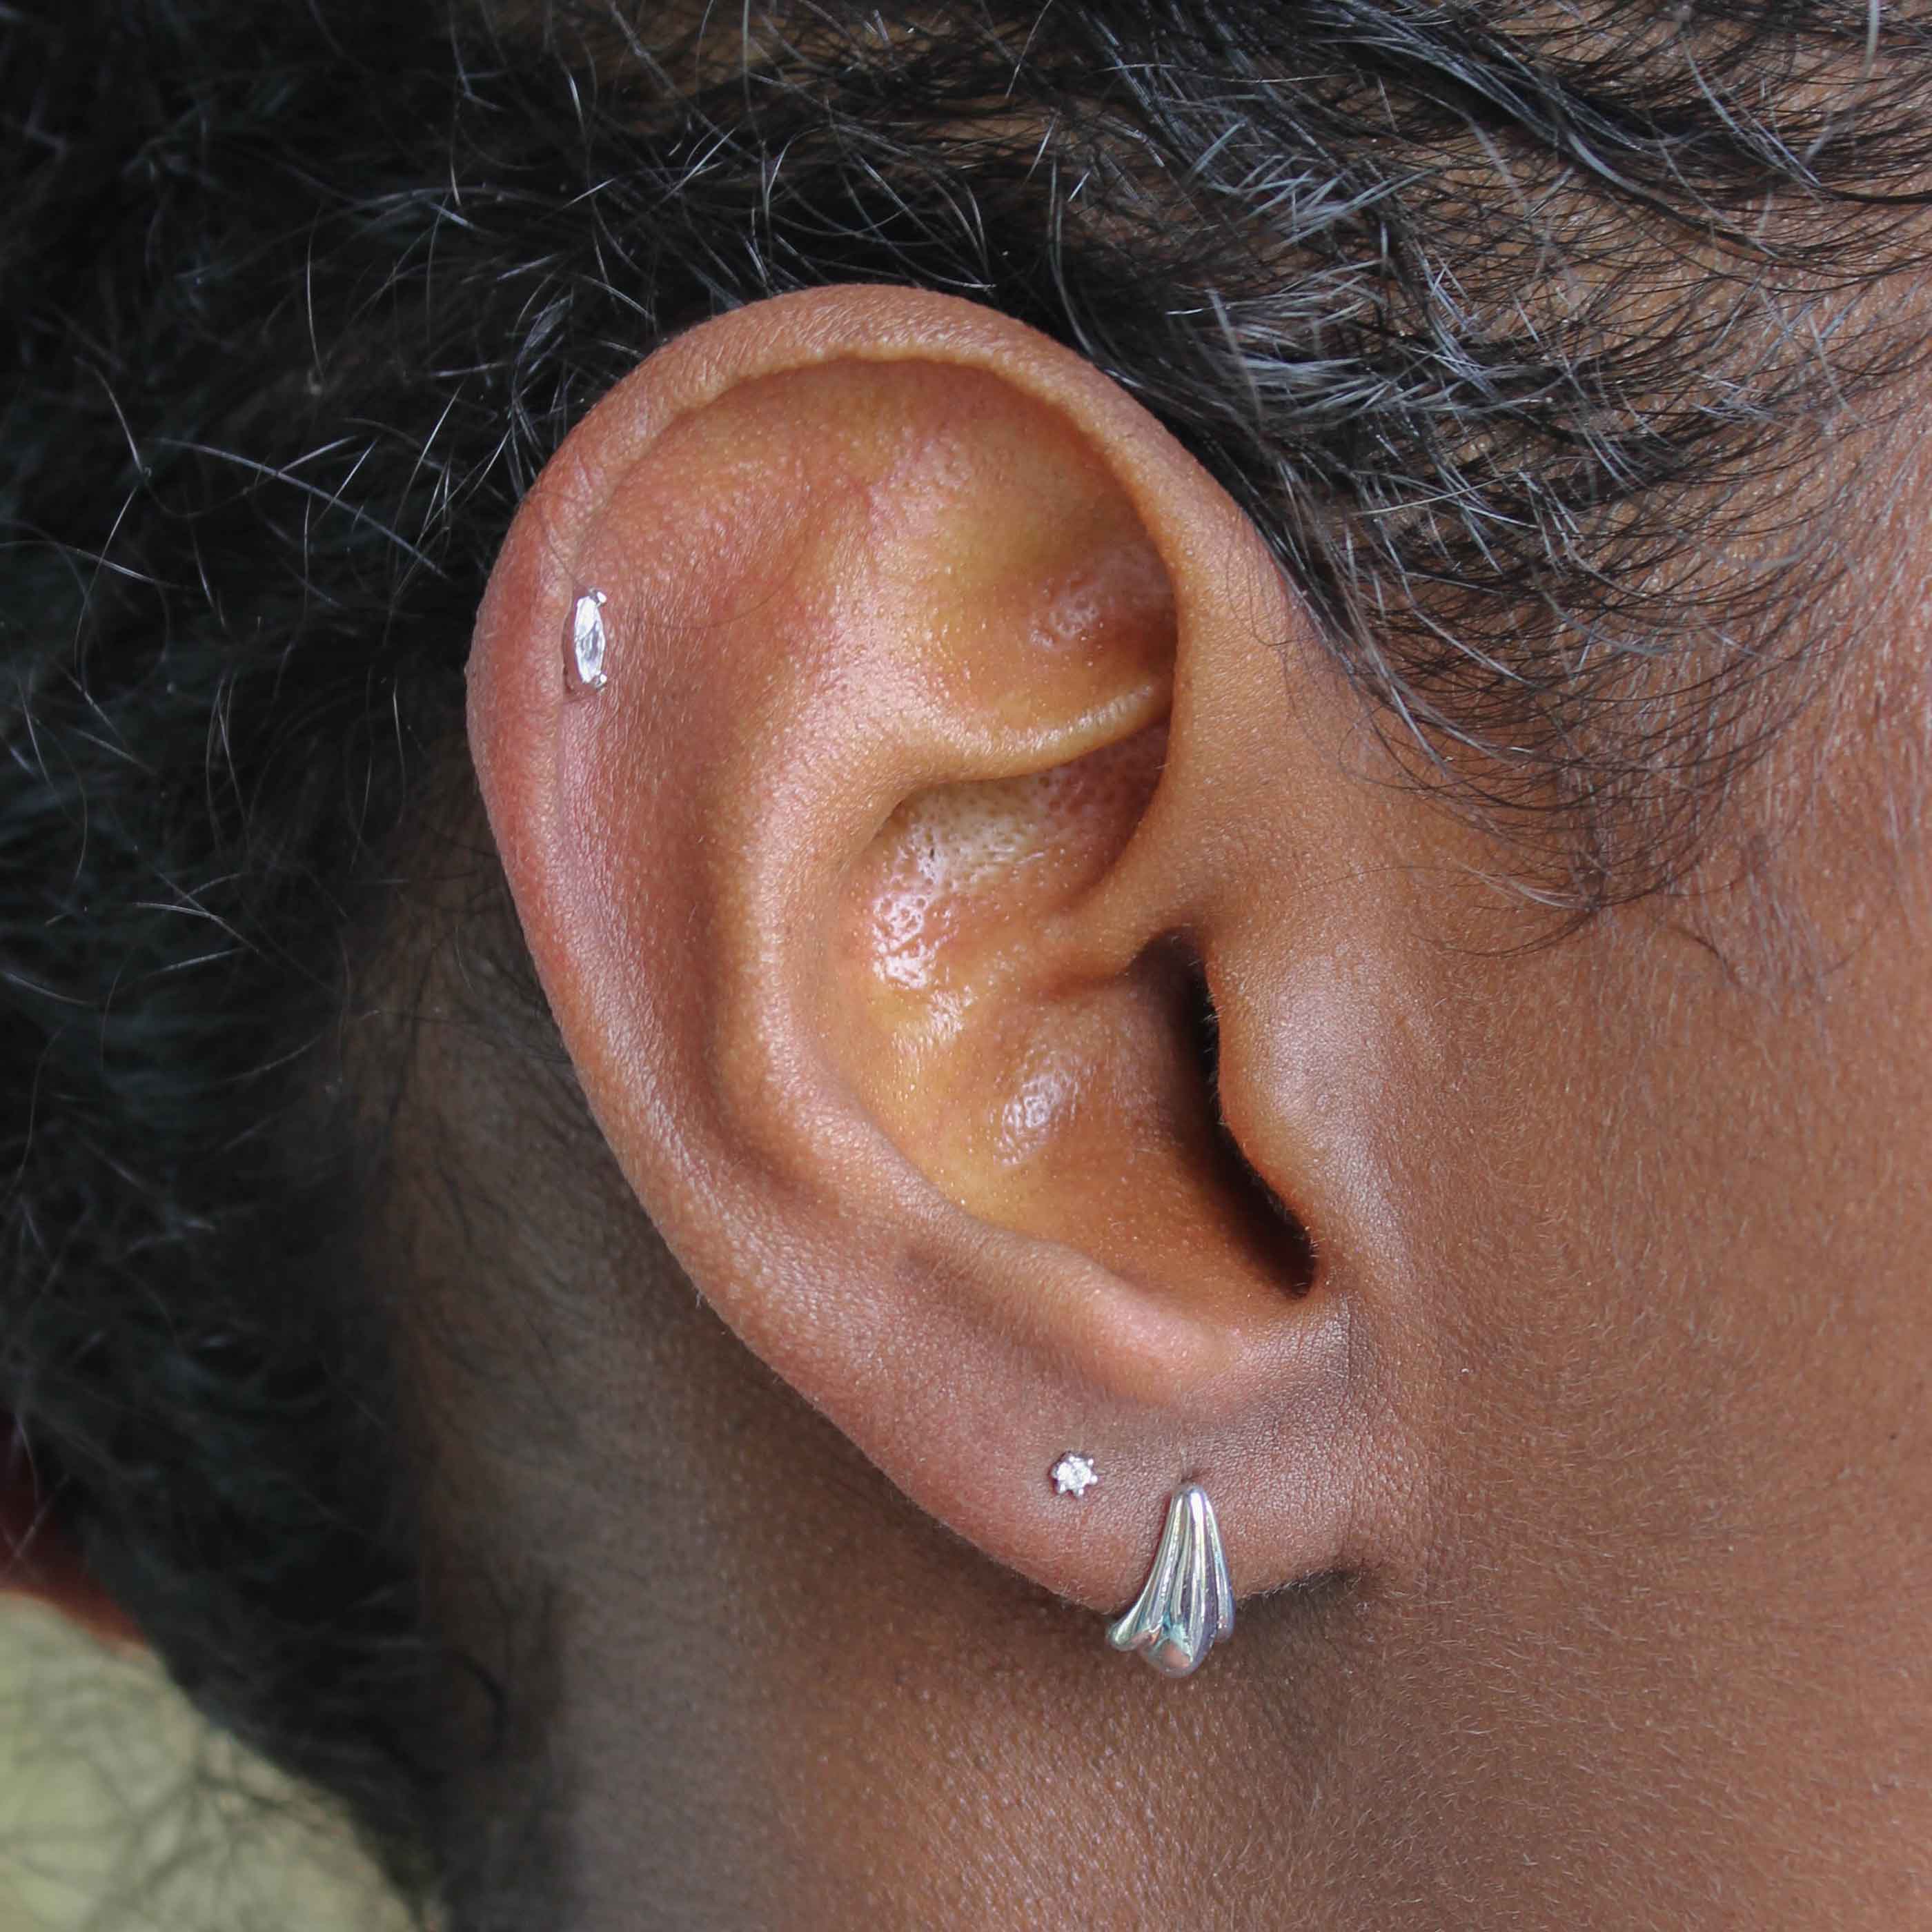 Flora Tiny Barbell in Silver worn in second lobe